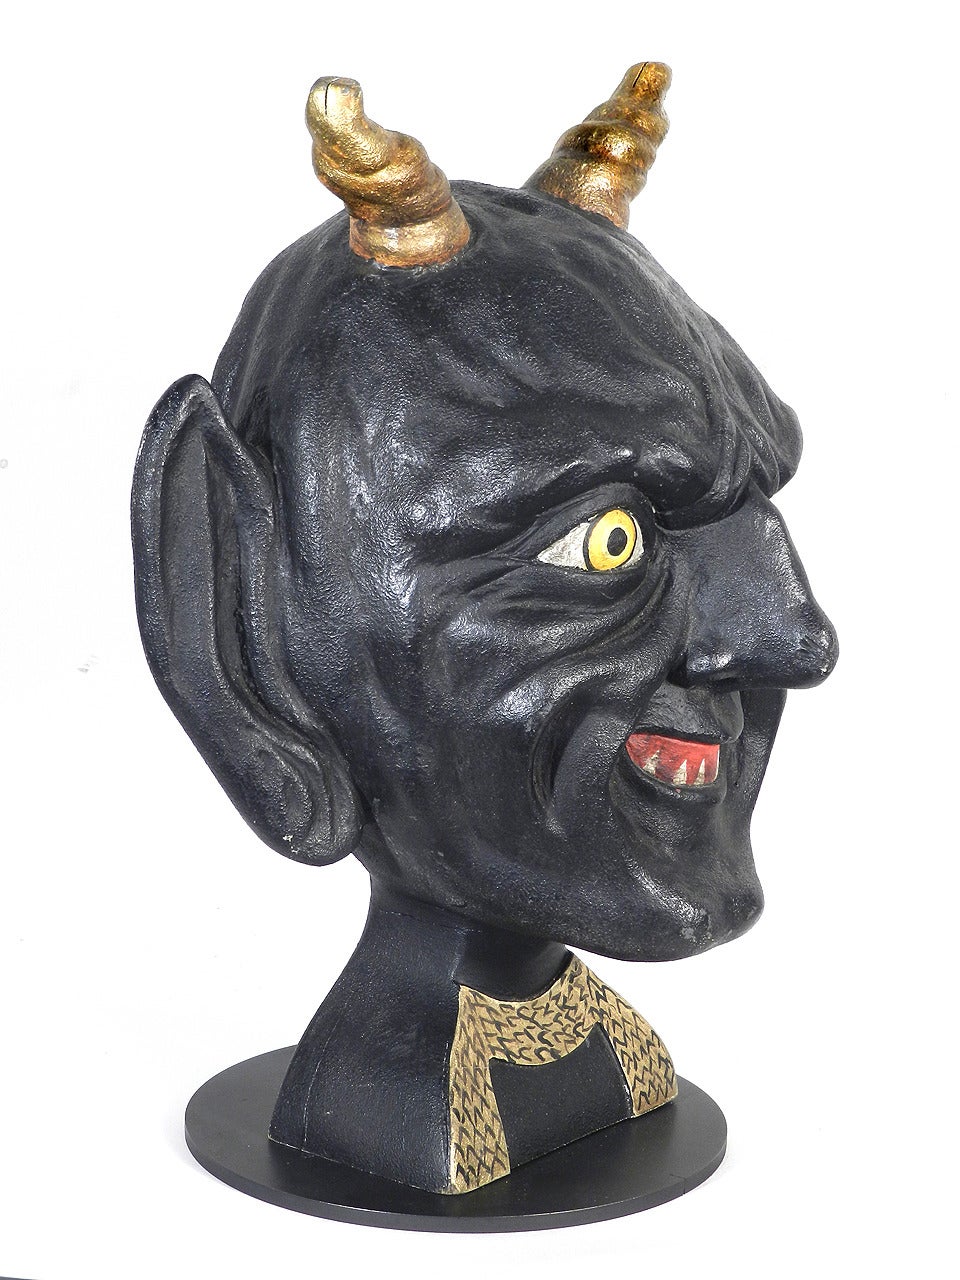 This is an amazing hand-carved one of a kind solid wood devil's head. I can't say what movie it was in or if it was just a test character. In any cast Tom Burton liked it enough to display and be photographed with it. If you look at the picture the